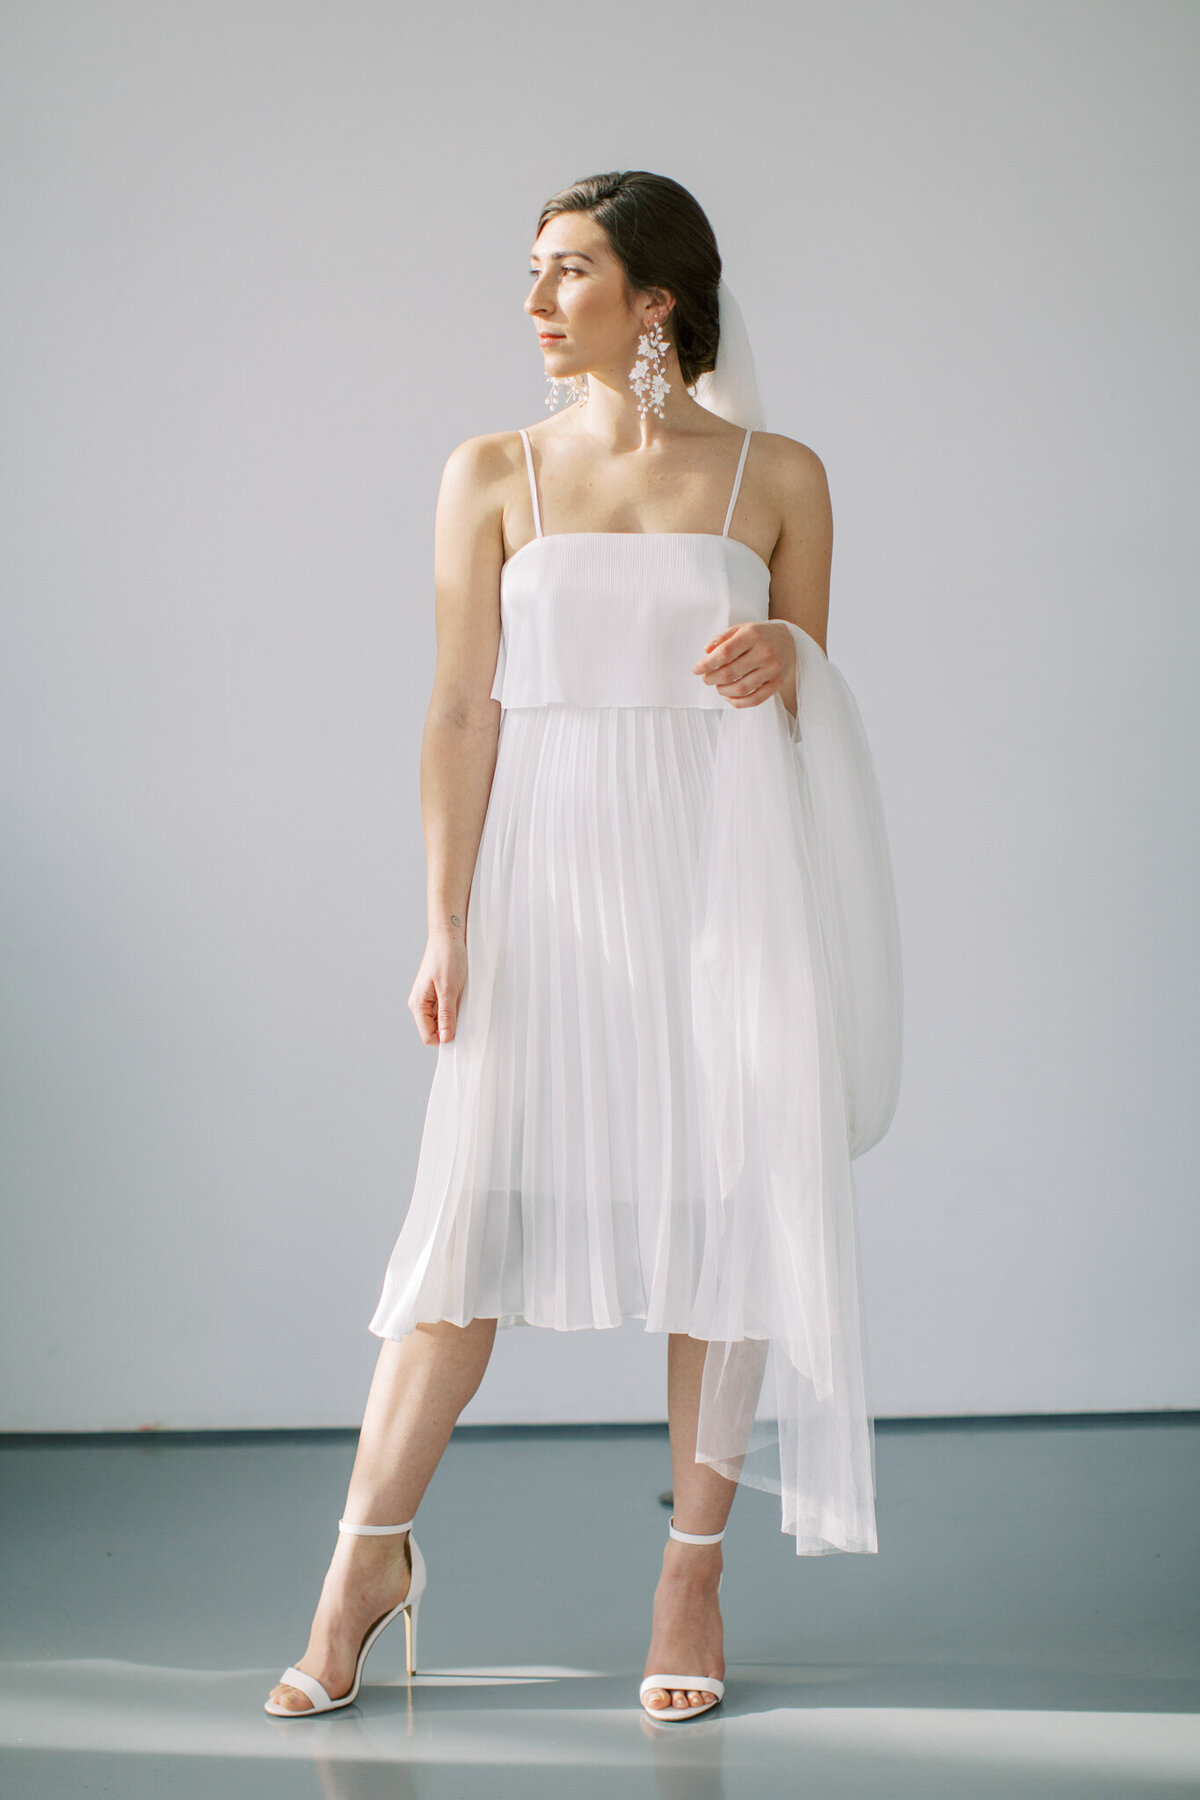 Classic and feminine whit pleated elopement dress By Catalfo, elegant wedding fashion based in Kelowna. Featured on the Brontë Bride Vendor Guide.